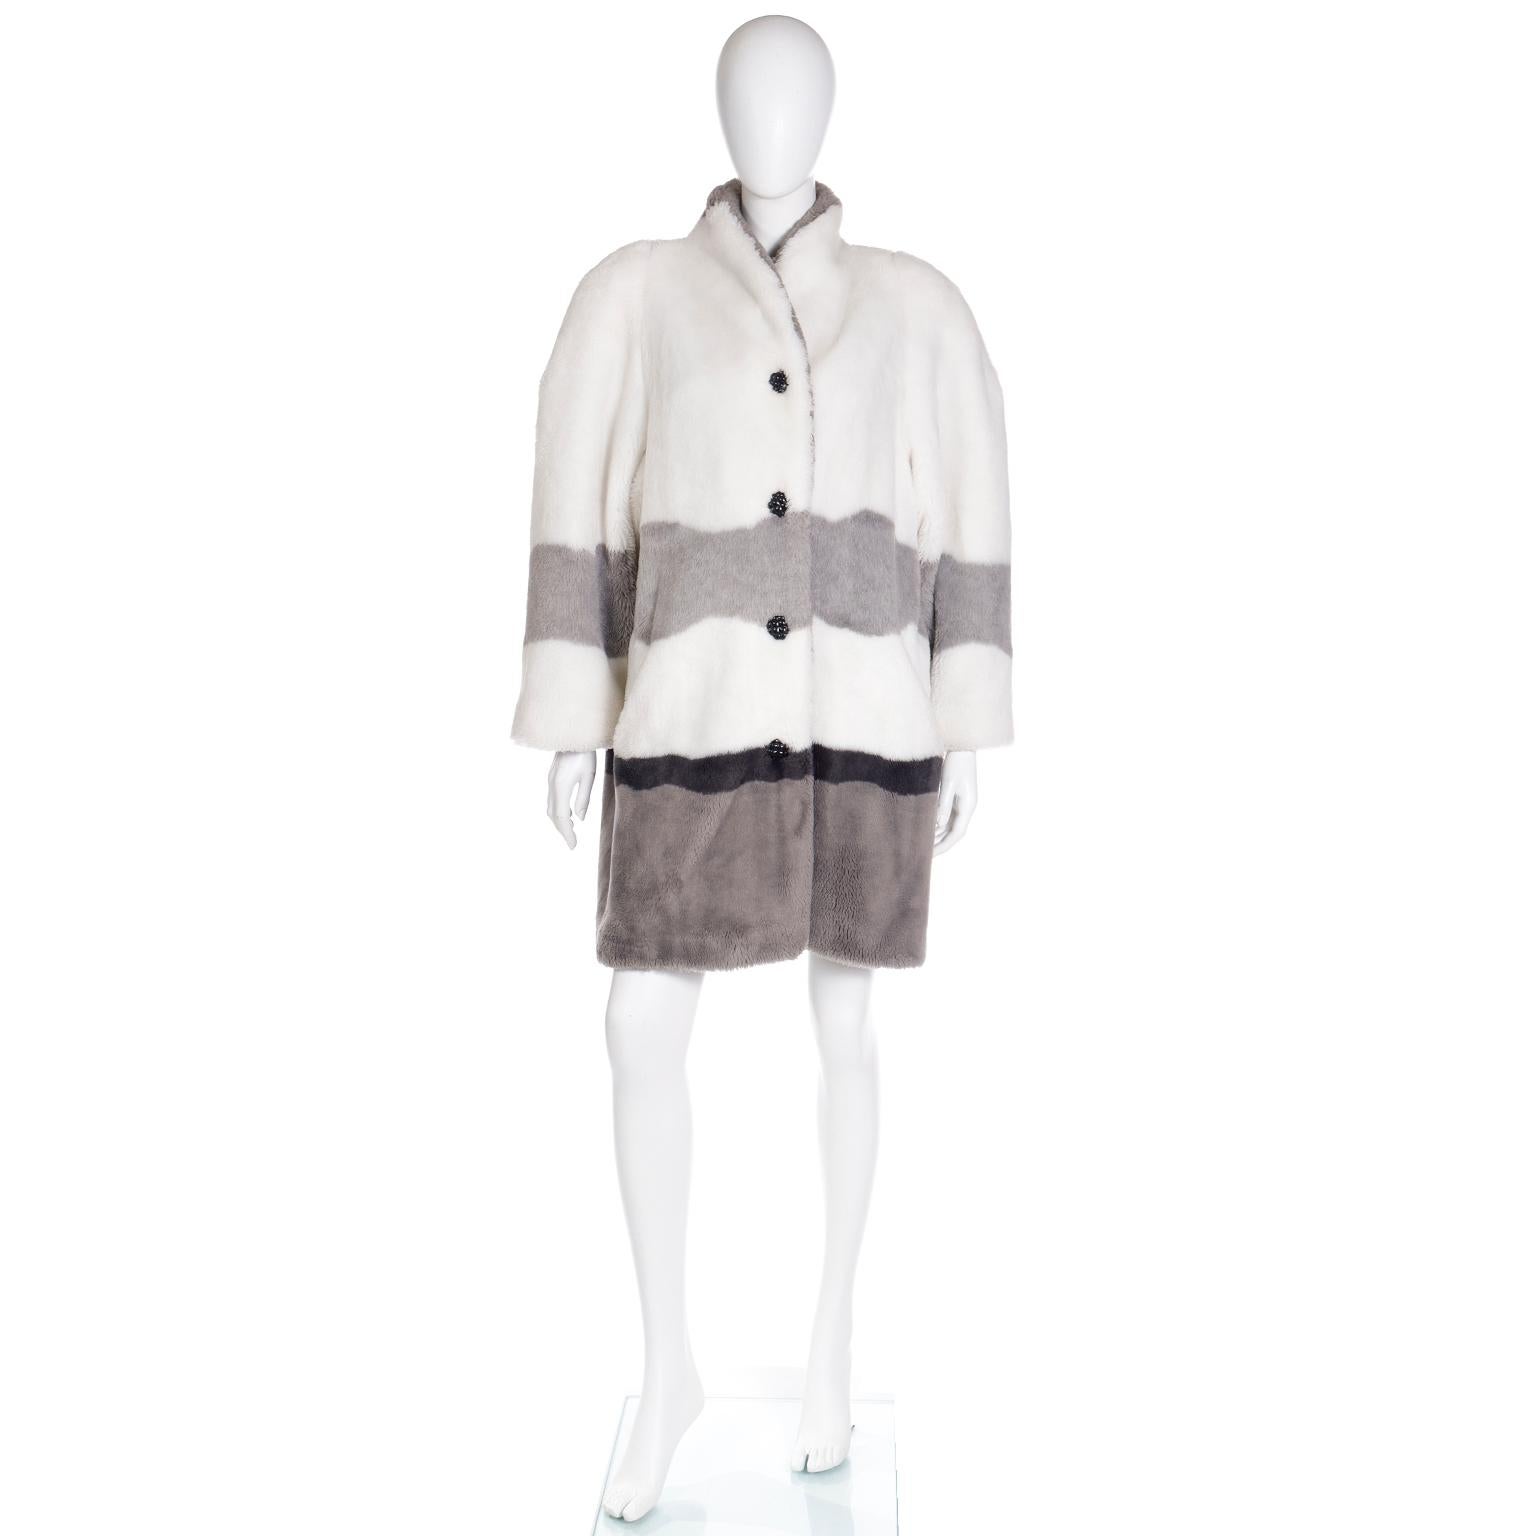 This rare vintage New York City Skyline faux fur coat is in sophisticated shades of white, black and grey. This is one of those coats that would make any vintage lover swoon and for those who've never ventured into the vintage realm, this coat might